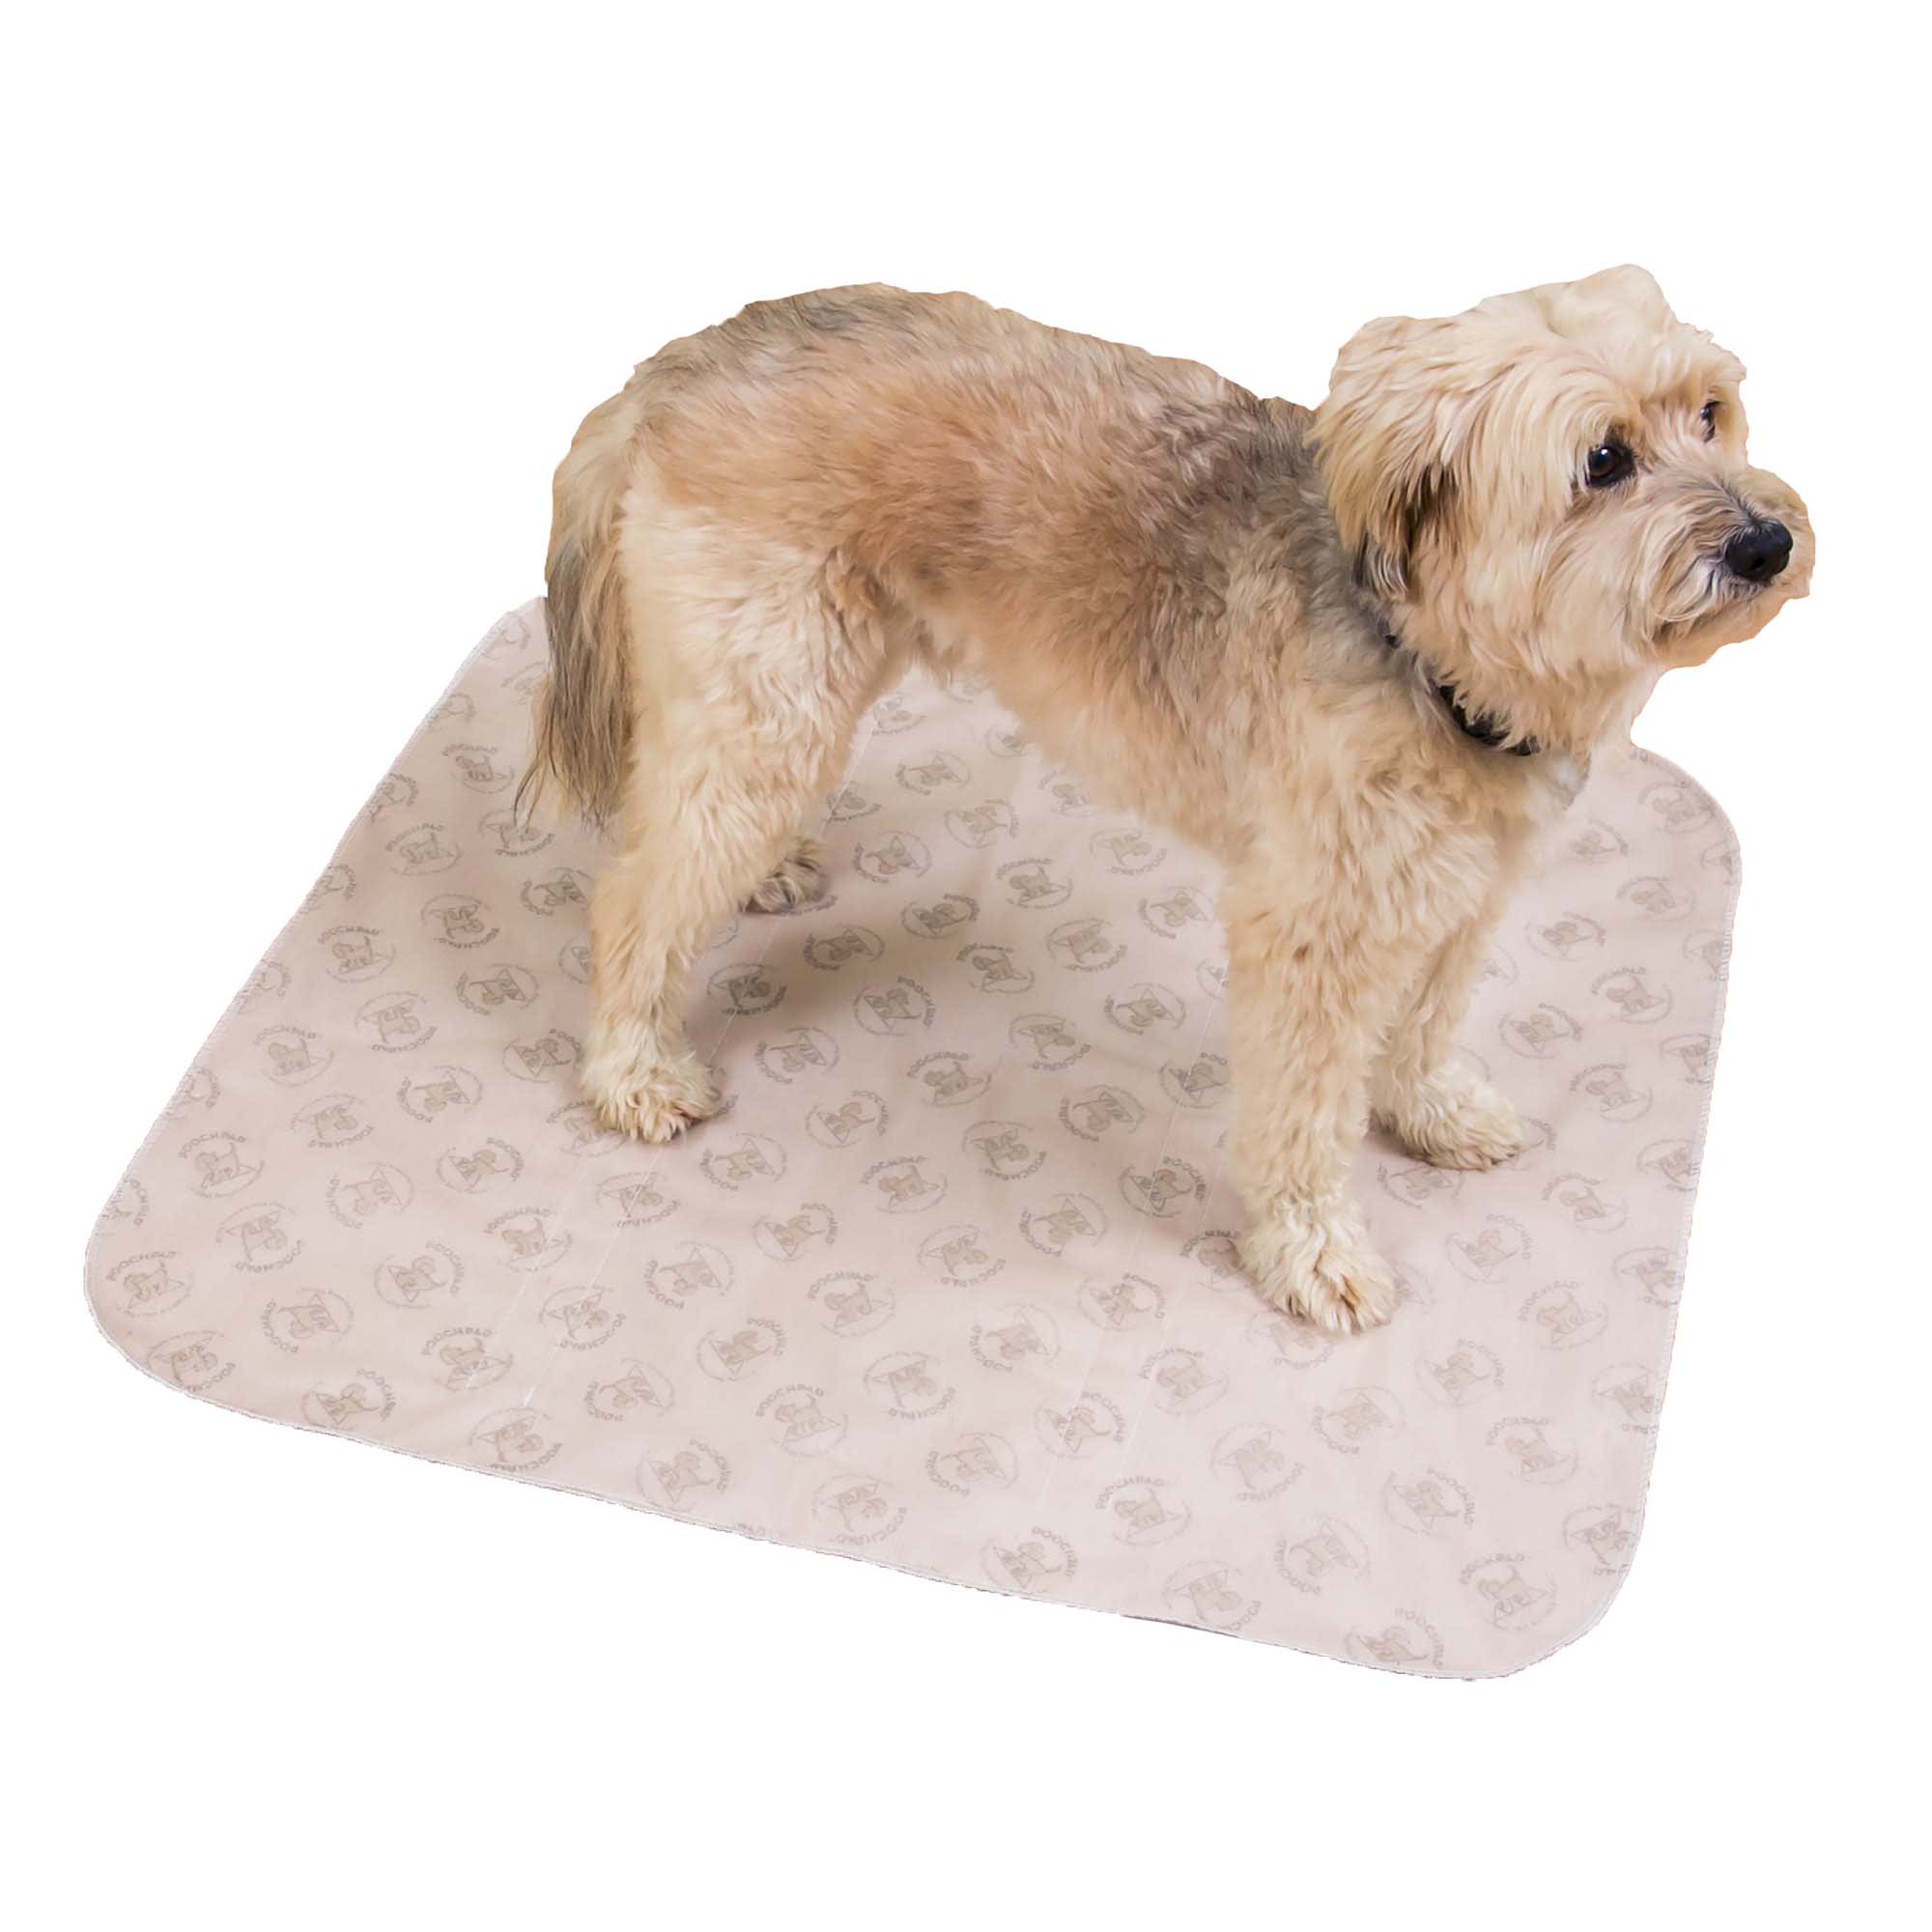 PoochPads Reusable Dog Pad, 48 L X 48 W X .2 H, For Dogs 90-120 lbs.